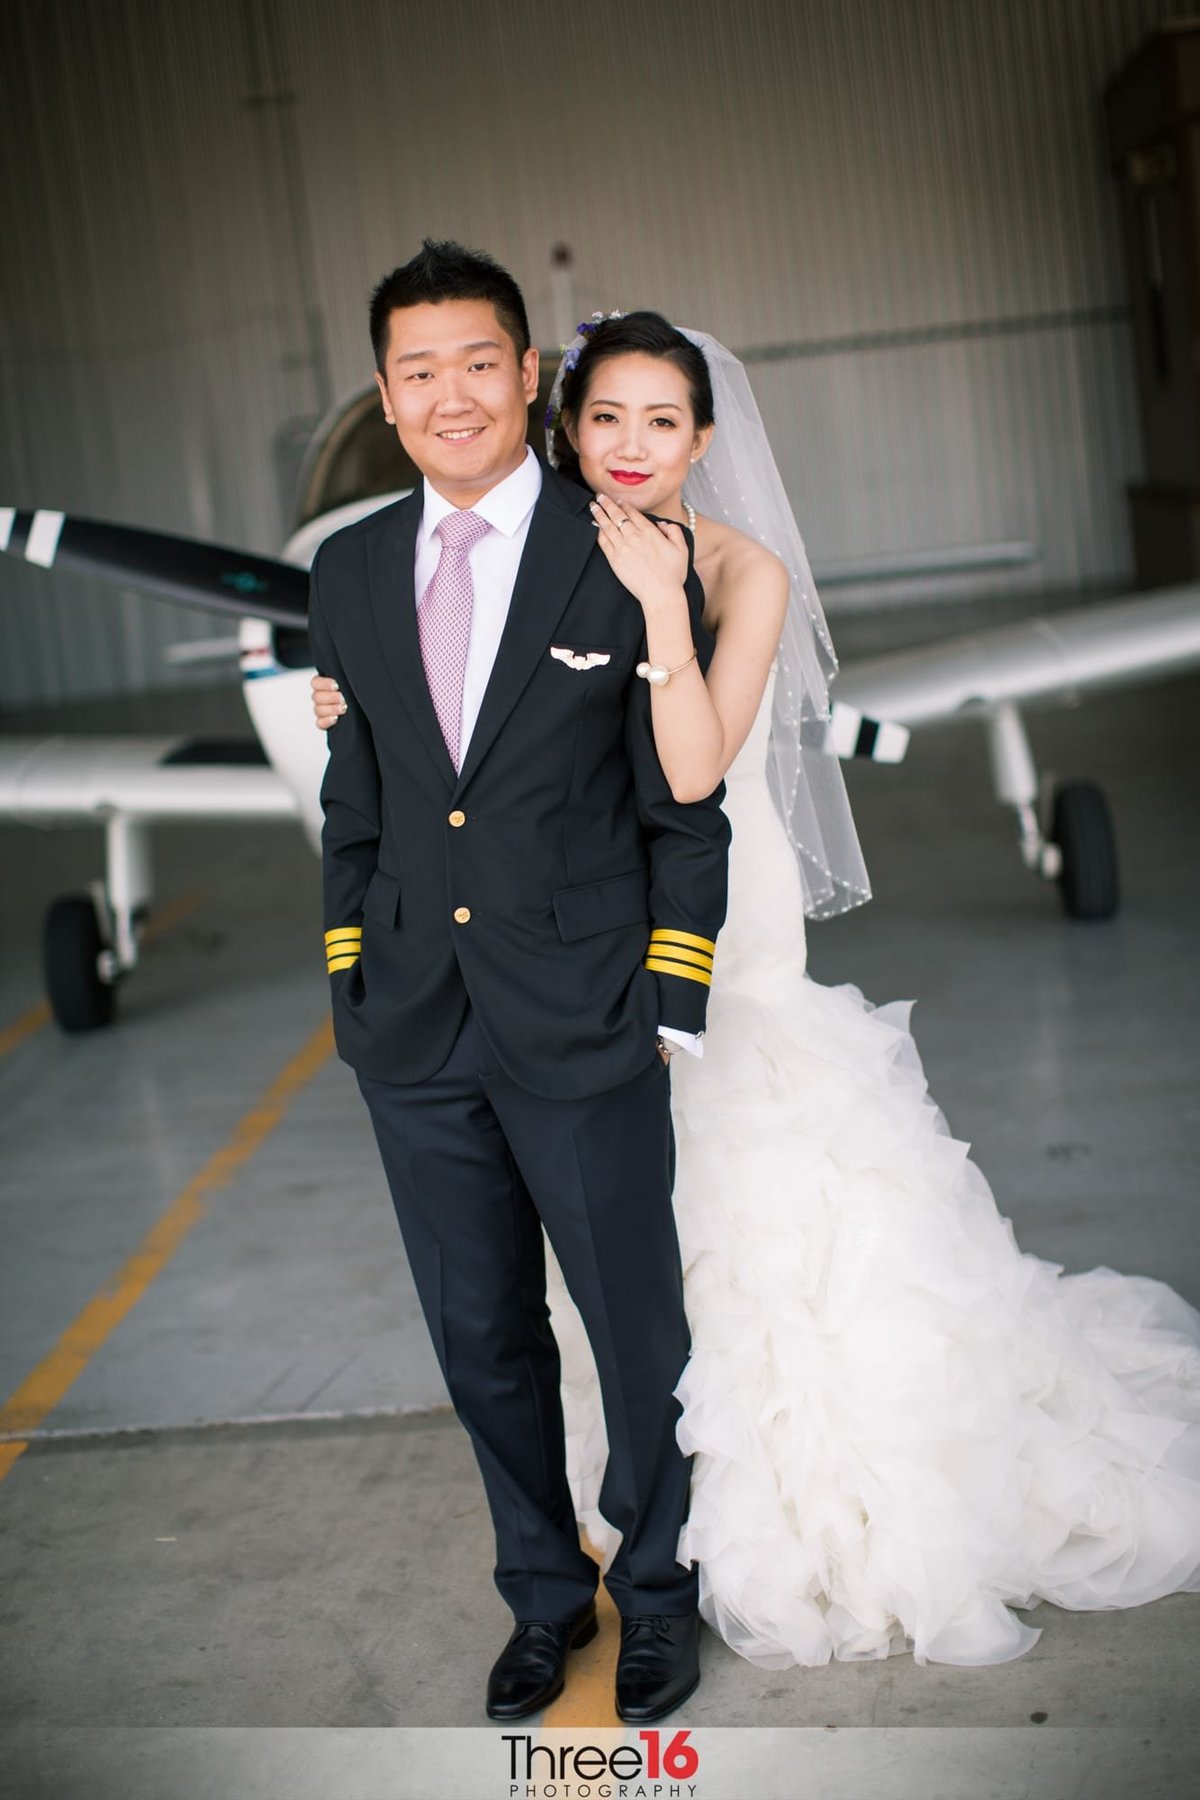 Bride and her Groom pose in front of small aircraft